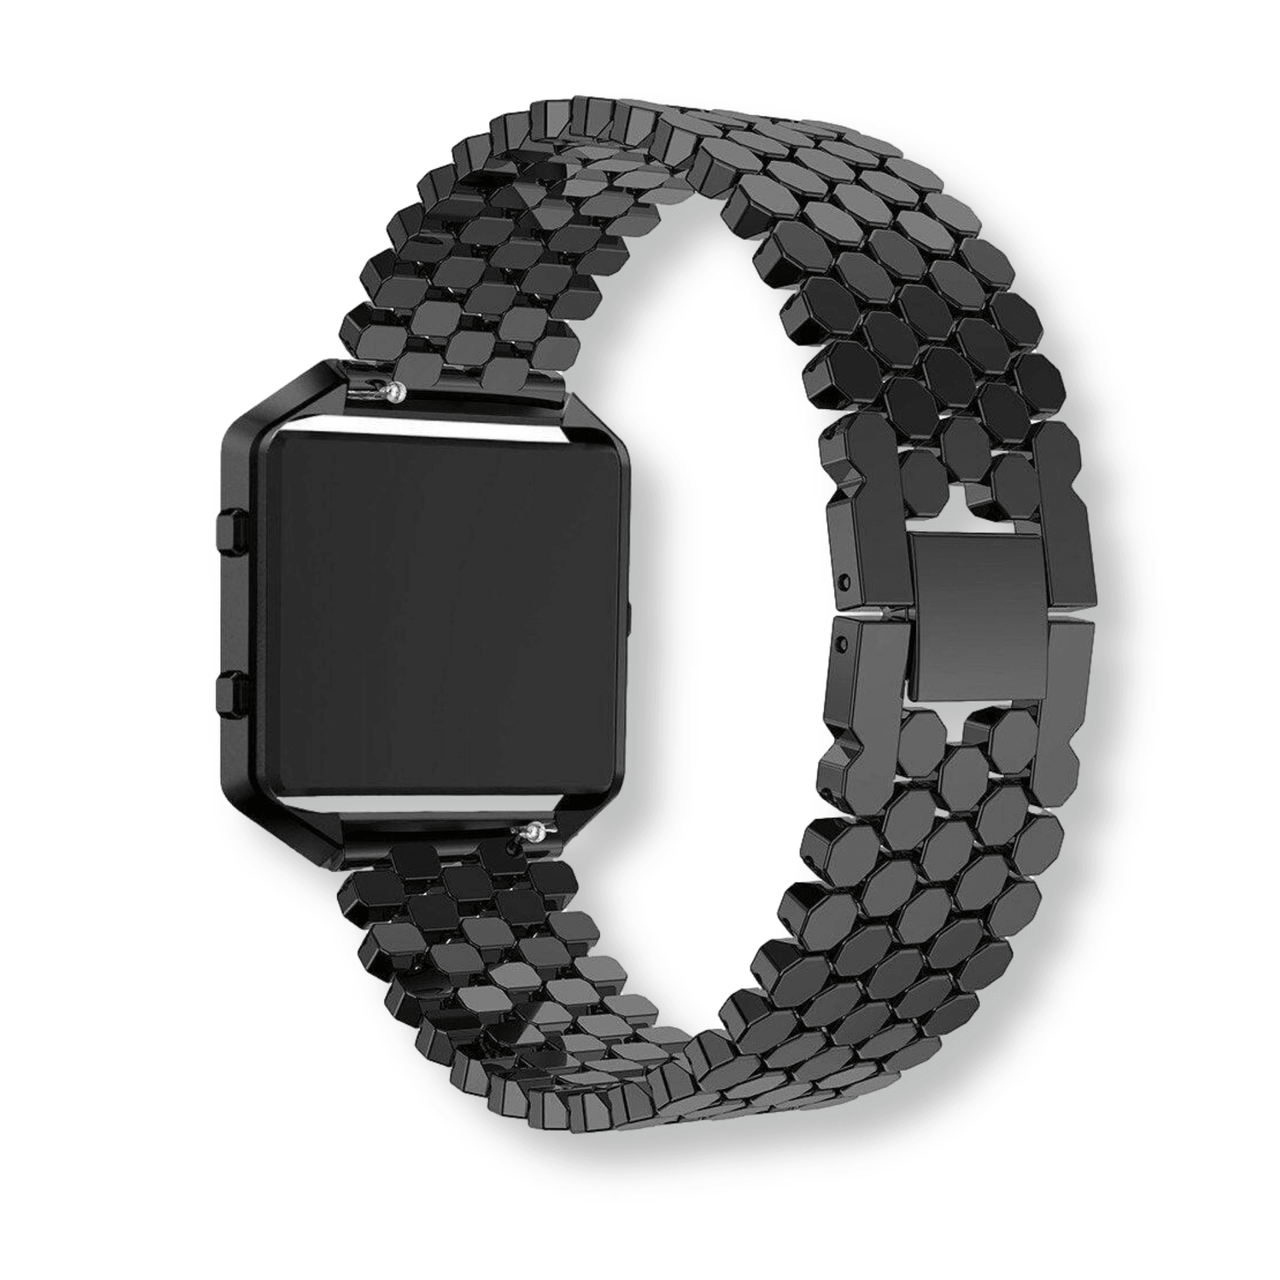 Luxury Stainless Steel Band for Fitbit Blaze - watchband.direct